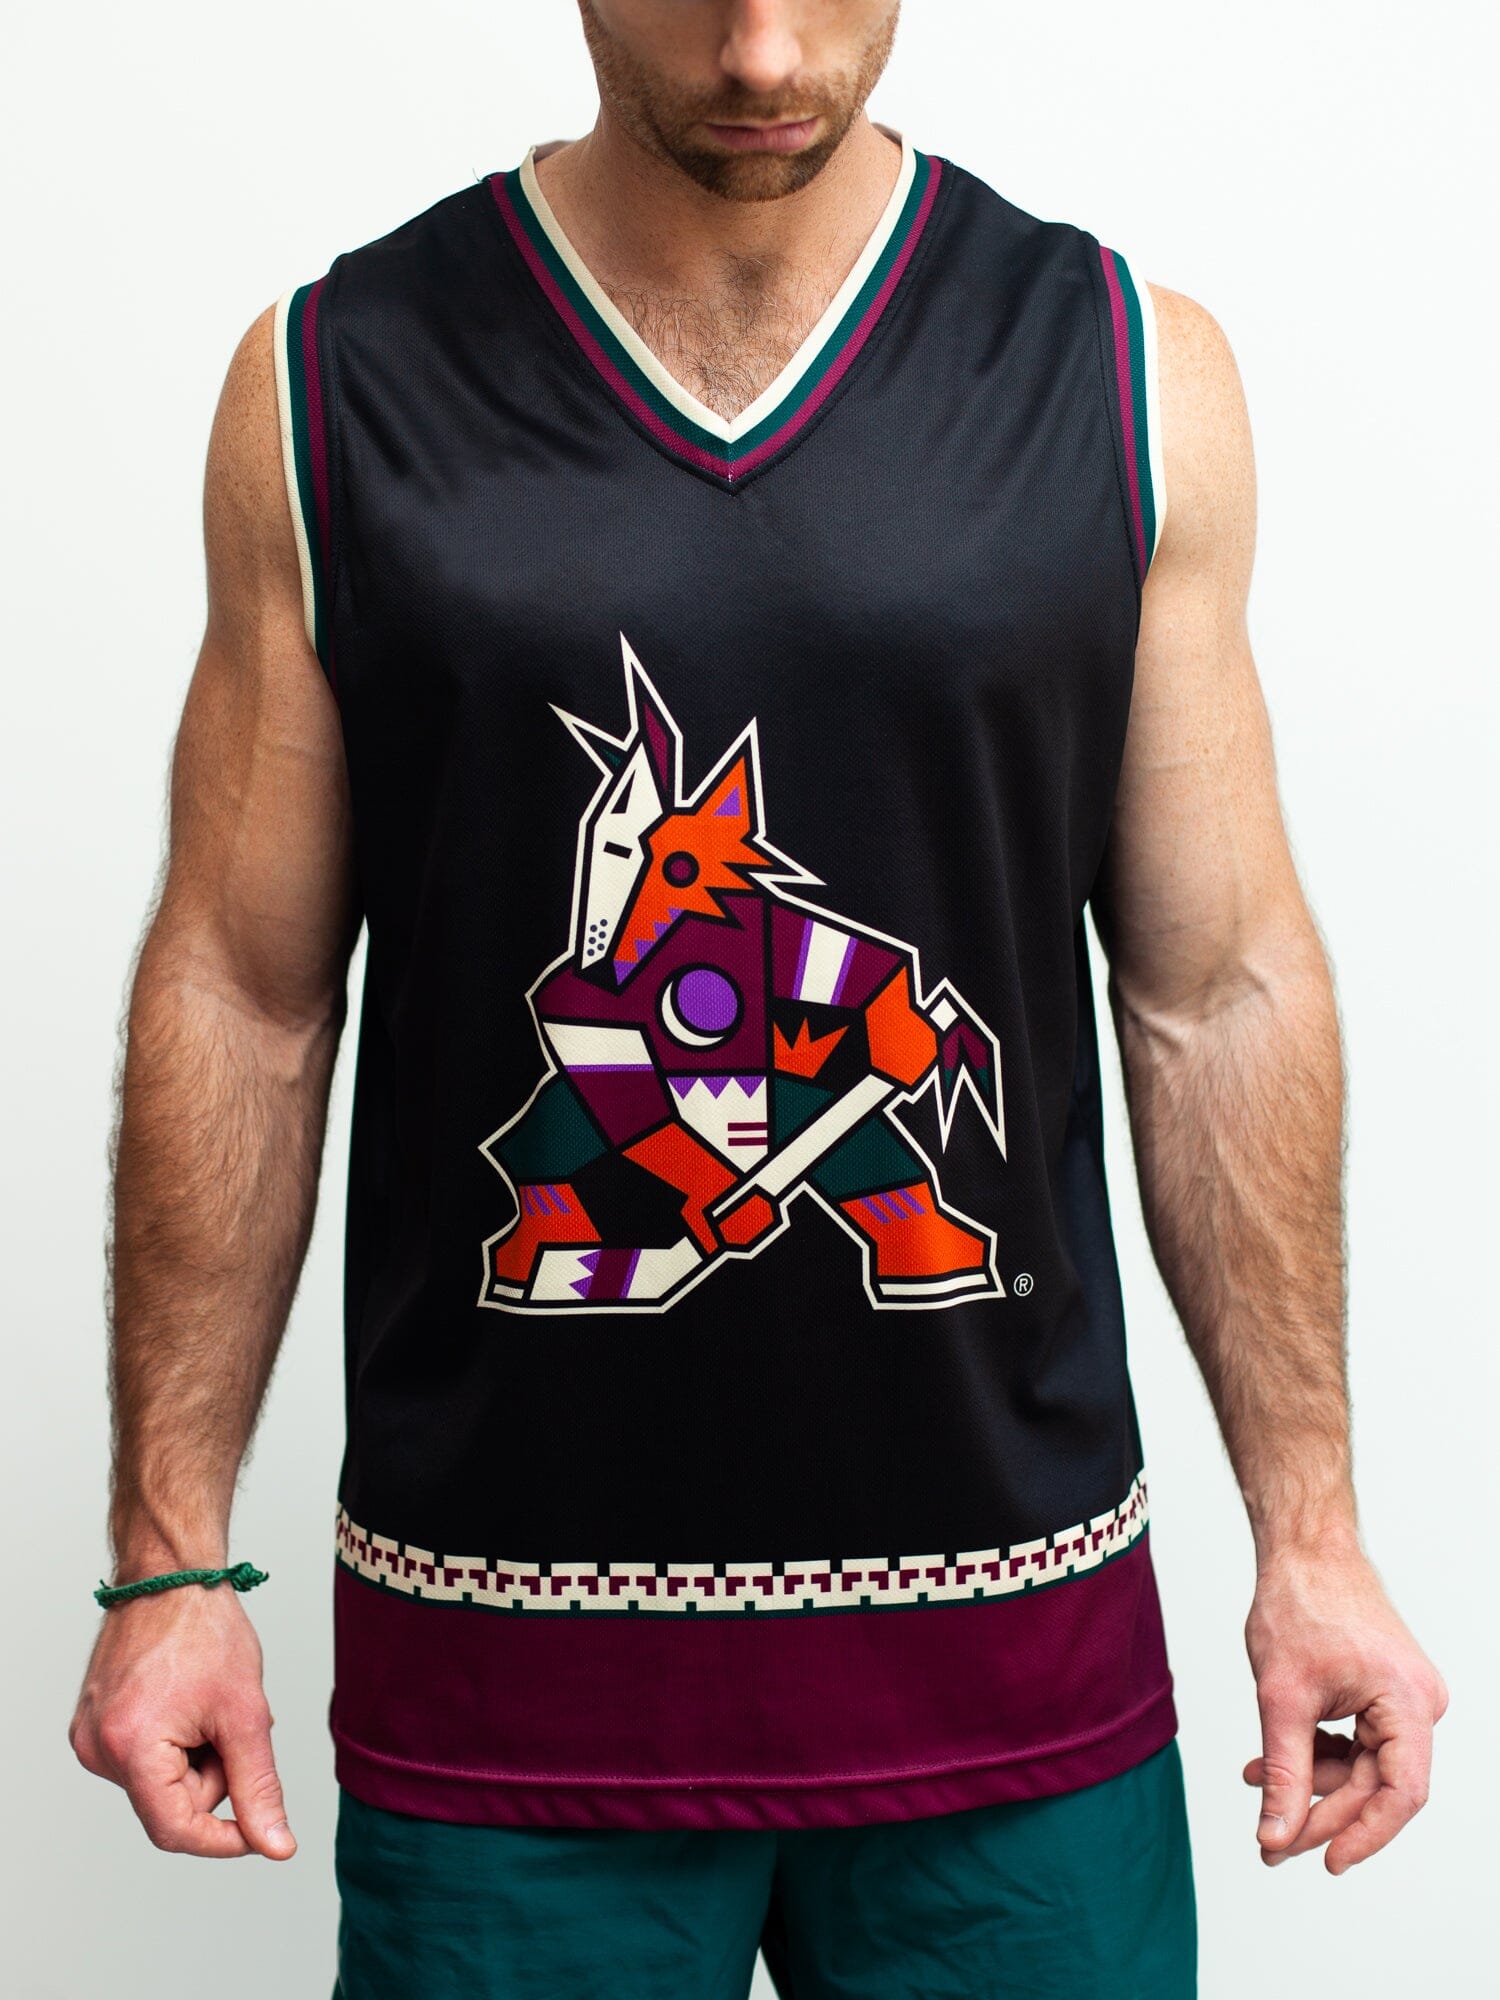 Space Coyotes jersey I designed for any Simpsons fans out there :  r/basketballjerseys